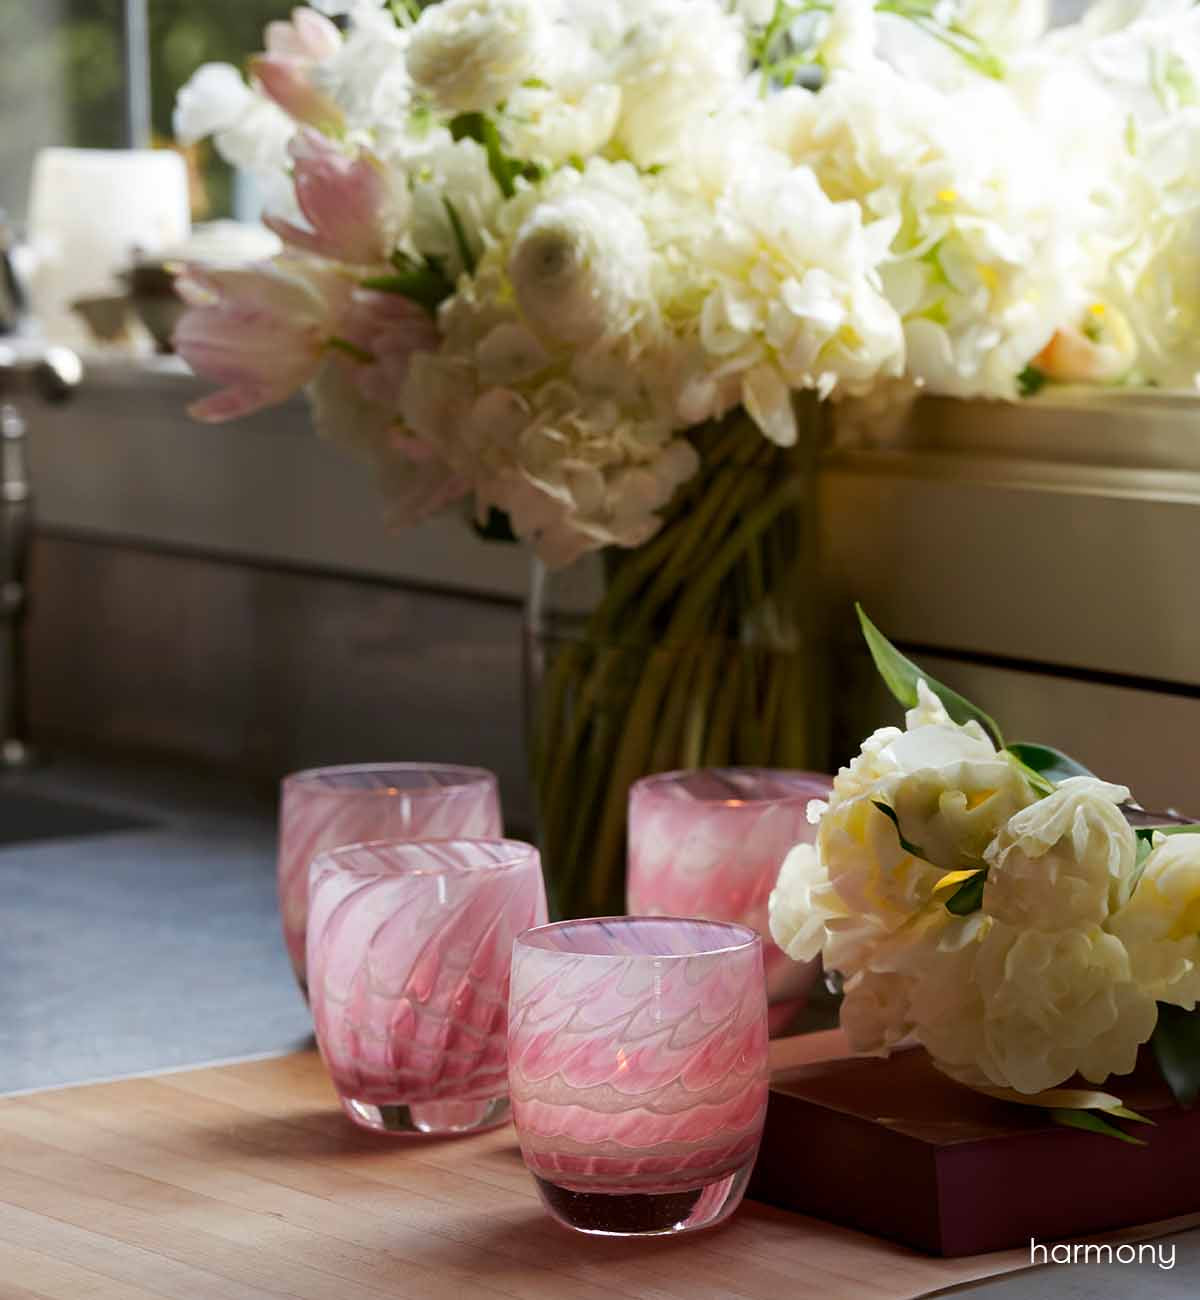 harmony, pink feathered texture hand-blown glass votive candle holder. In a lit kitchen display with a white bouquet.